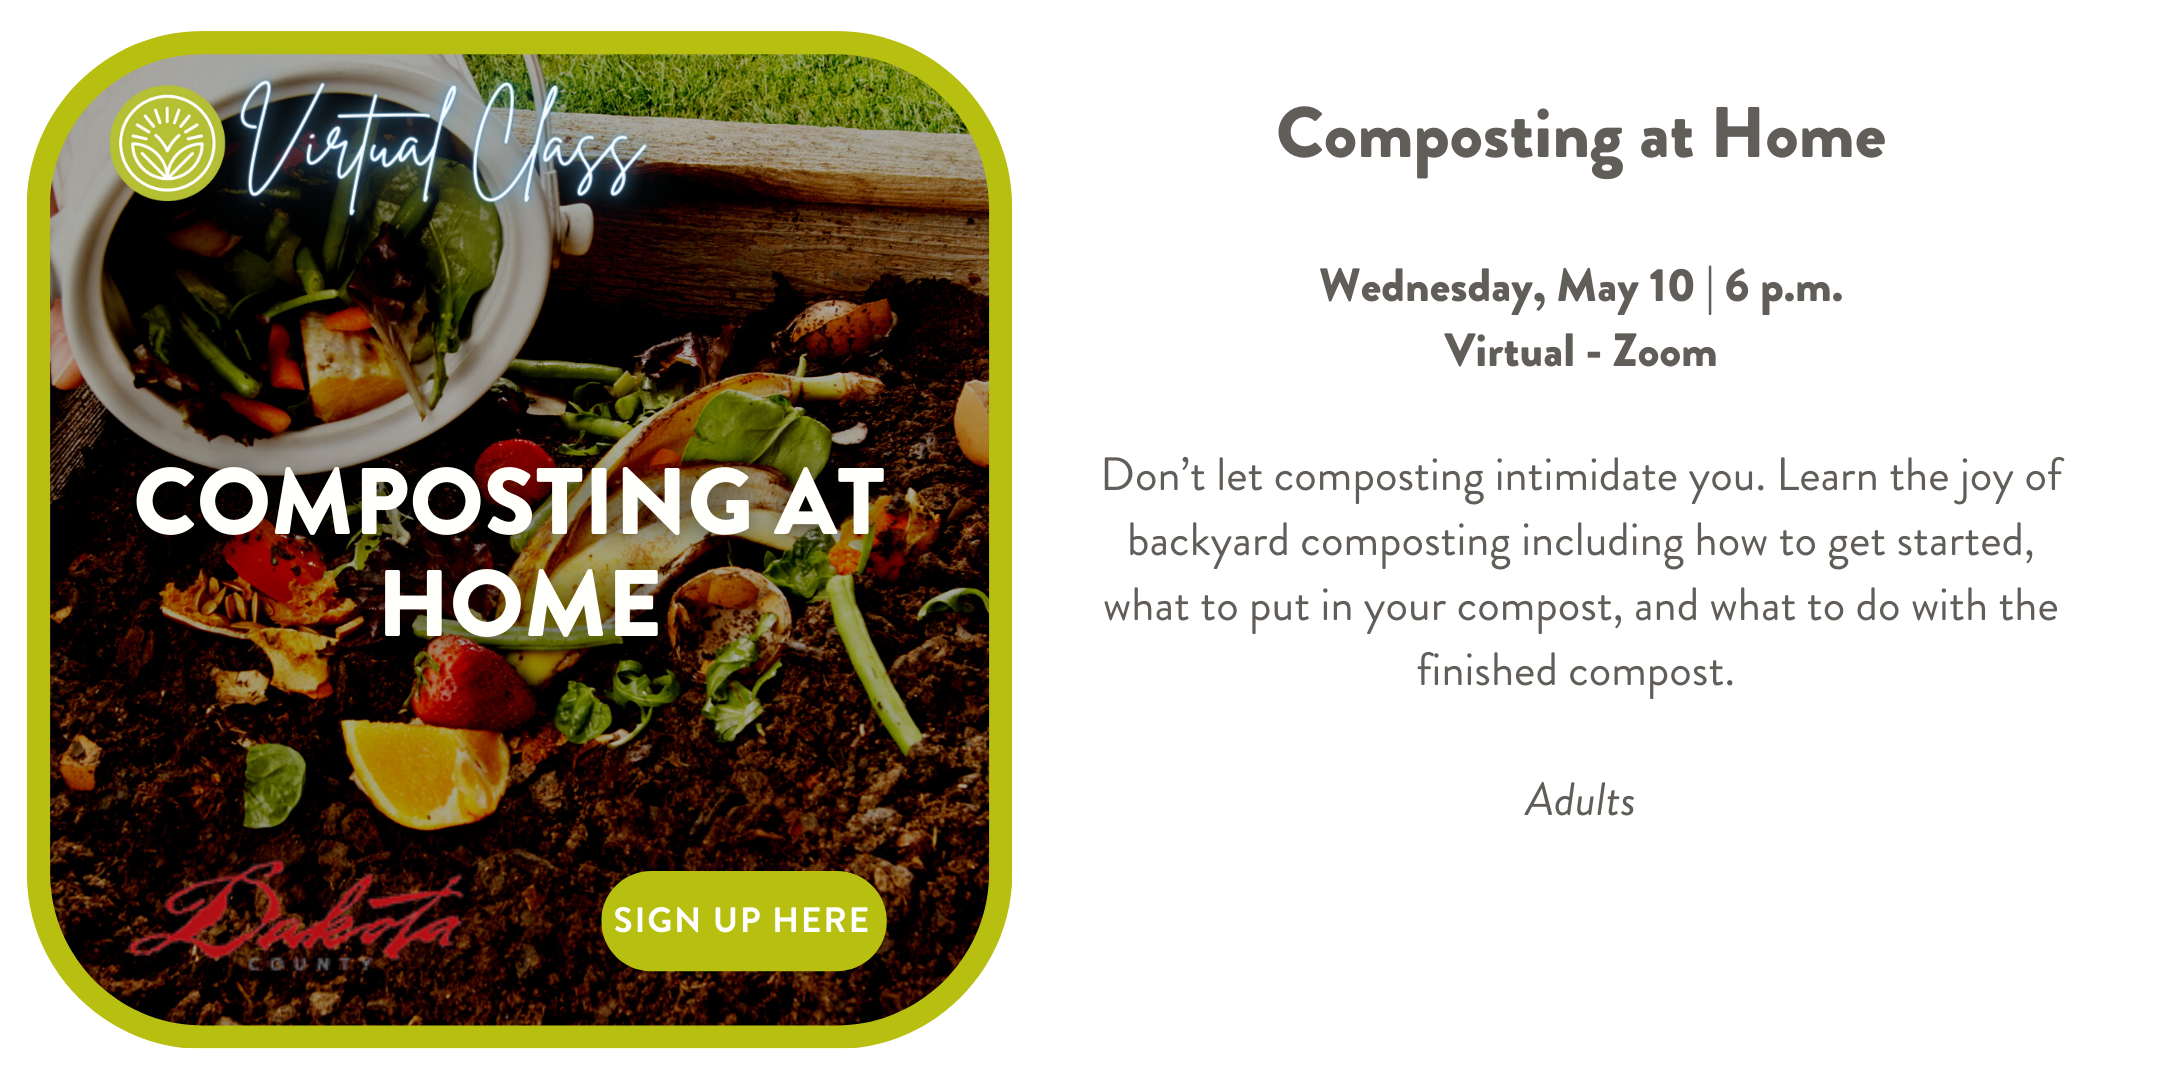 Wednesday, May 10 | 6 p.m. on zoom Don’t let composting intimidate you. Learn the joy of backyard composting including how to get started, what to put in your compost, and what to do with the finished compost. Click the link to sign-up!